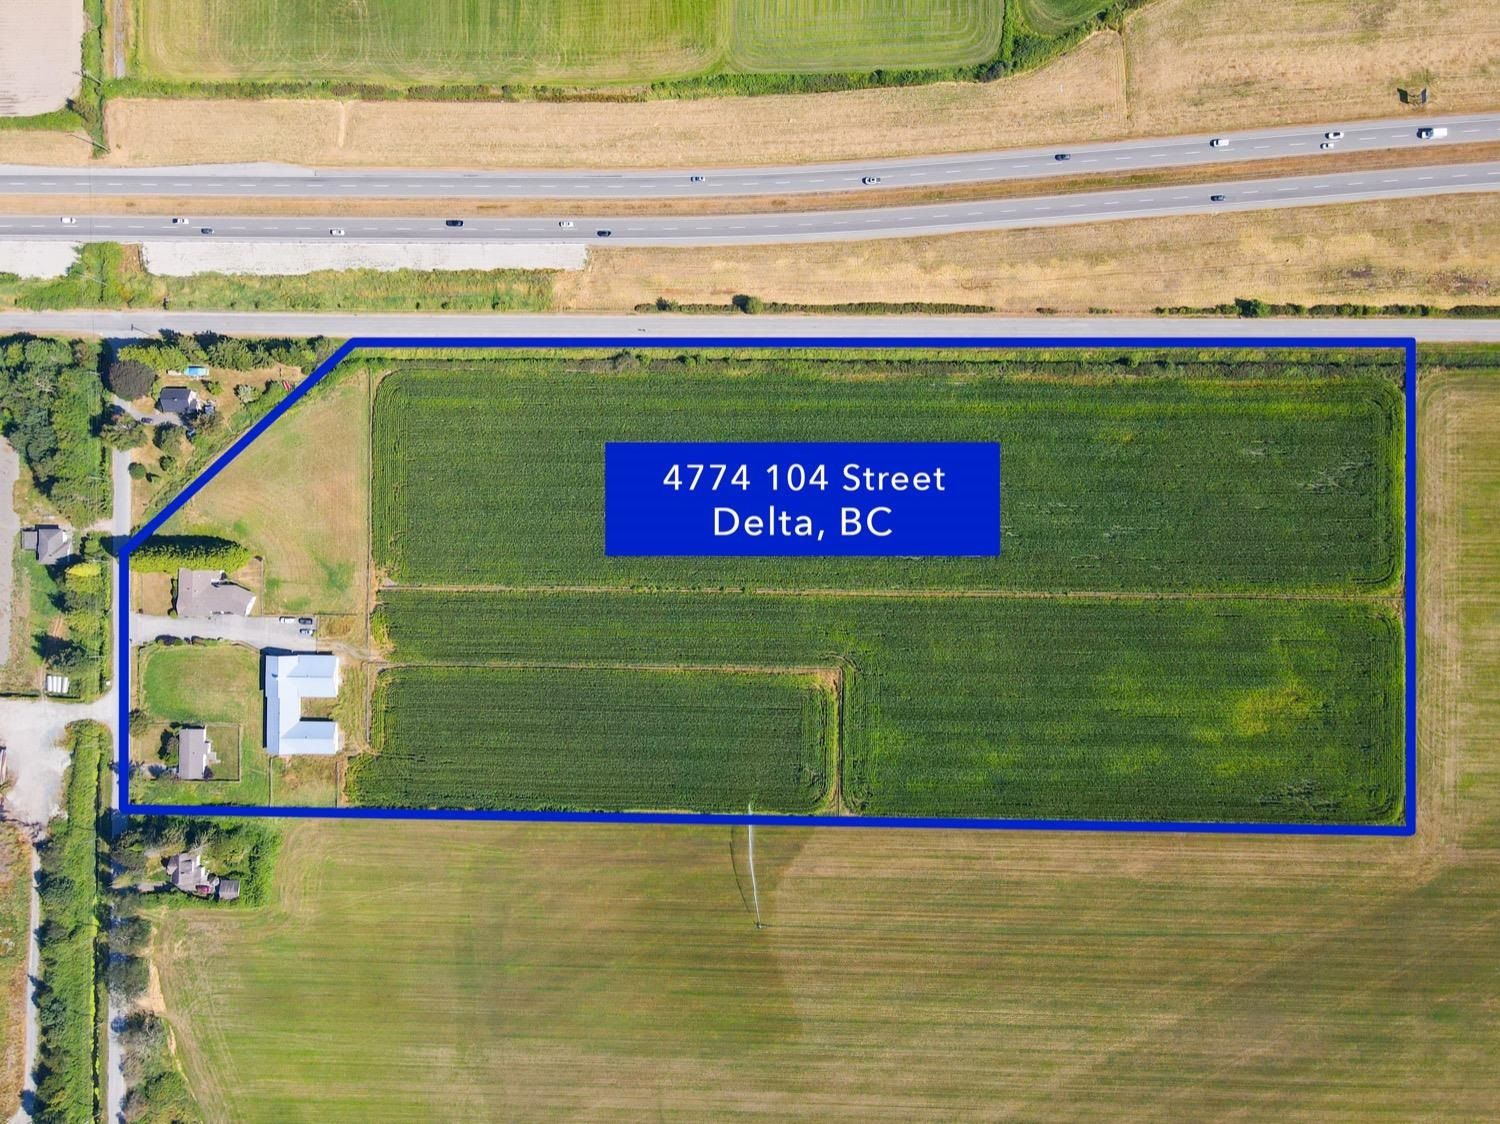 New property listed in East Delta, Ladner